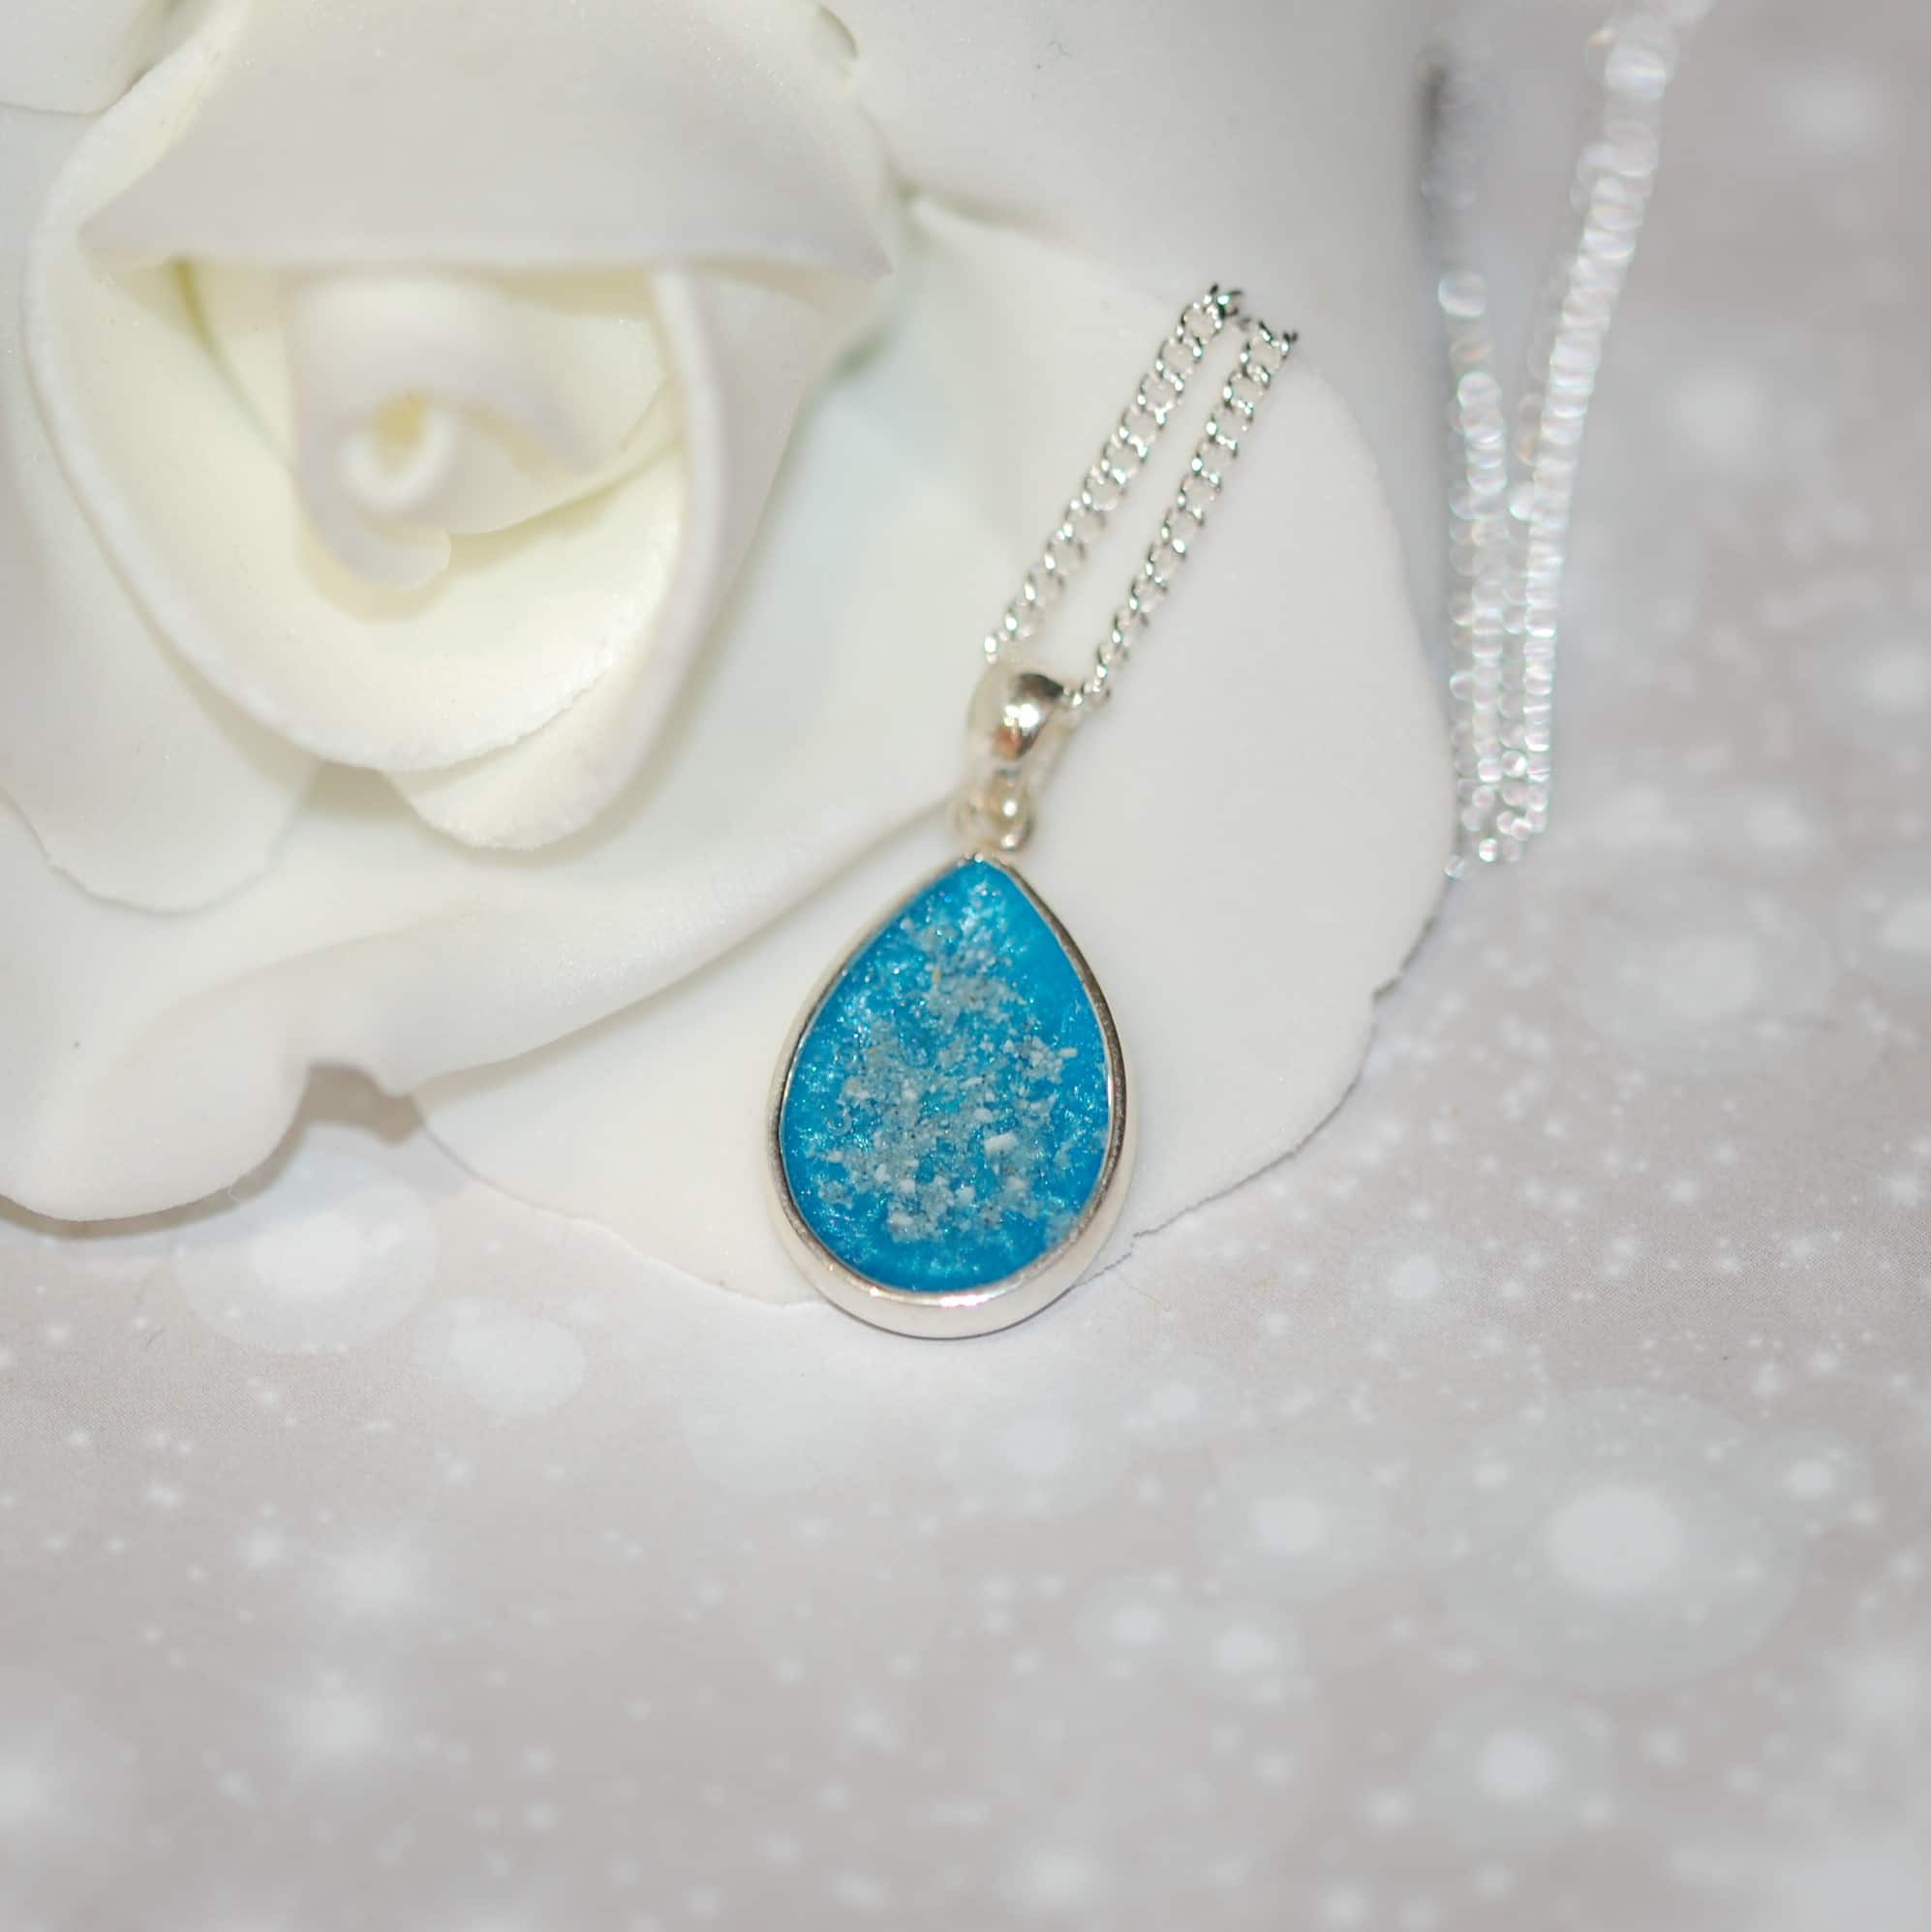 Silver tear drop pendant with pet fur or cremation ashes